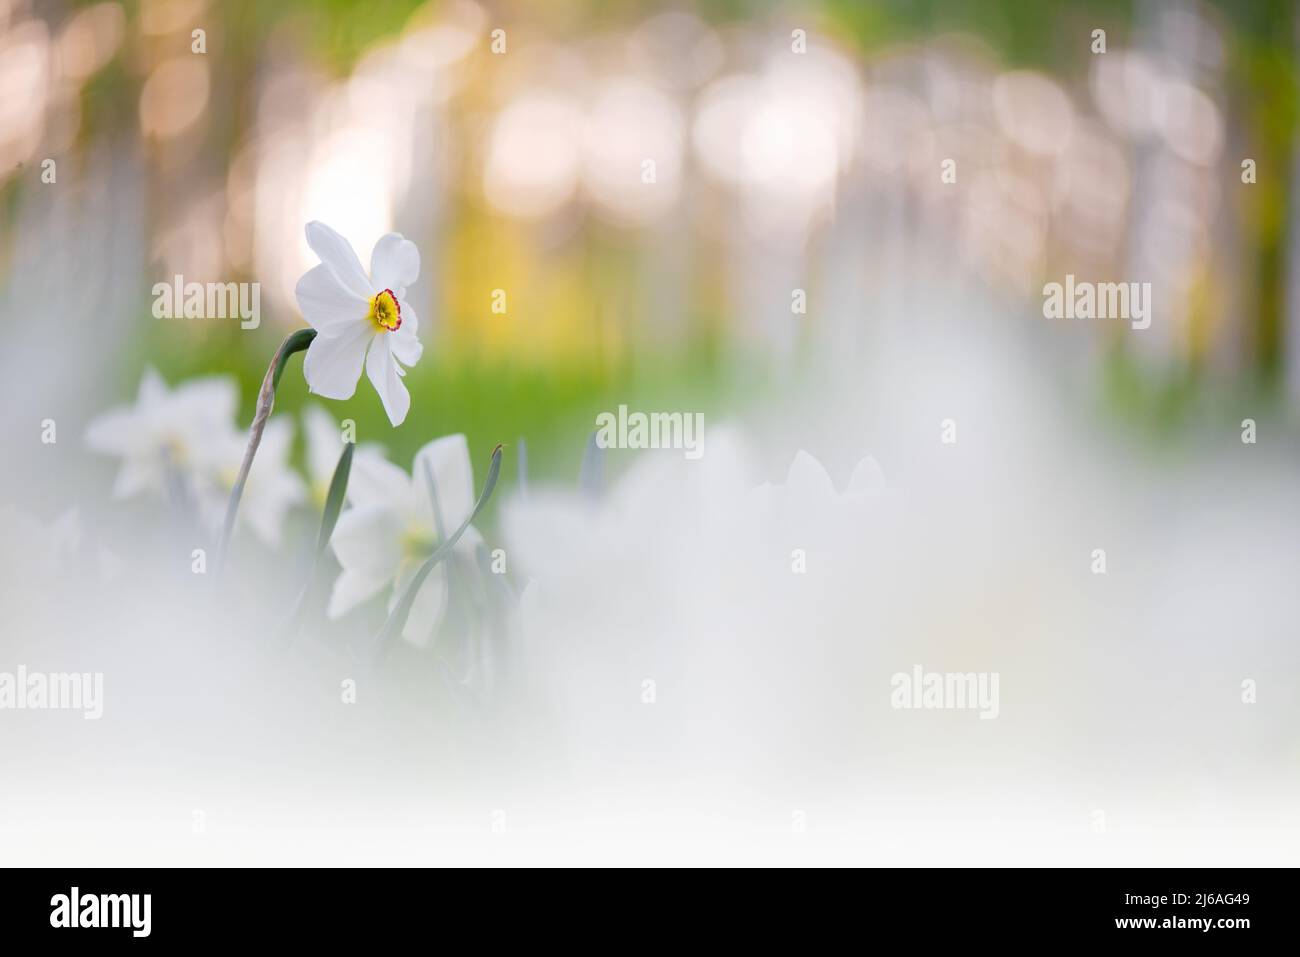 White daffodils in springtime, bokeh background. Selective focus and shallow depth of field. Stock Photo